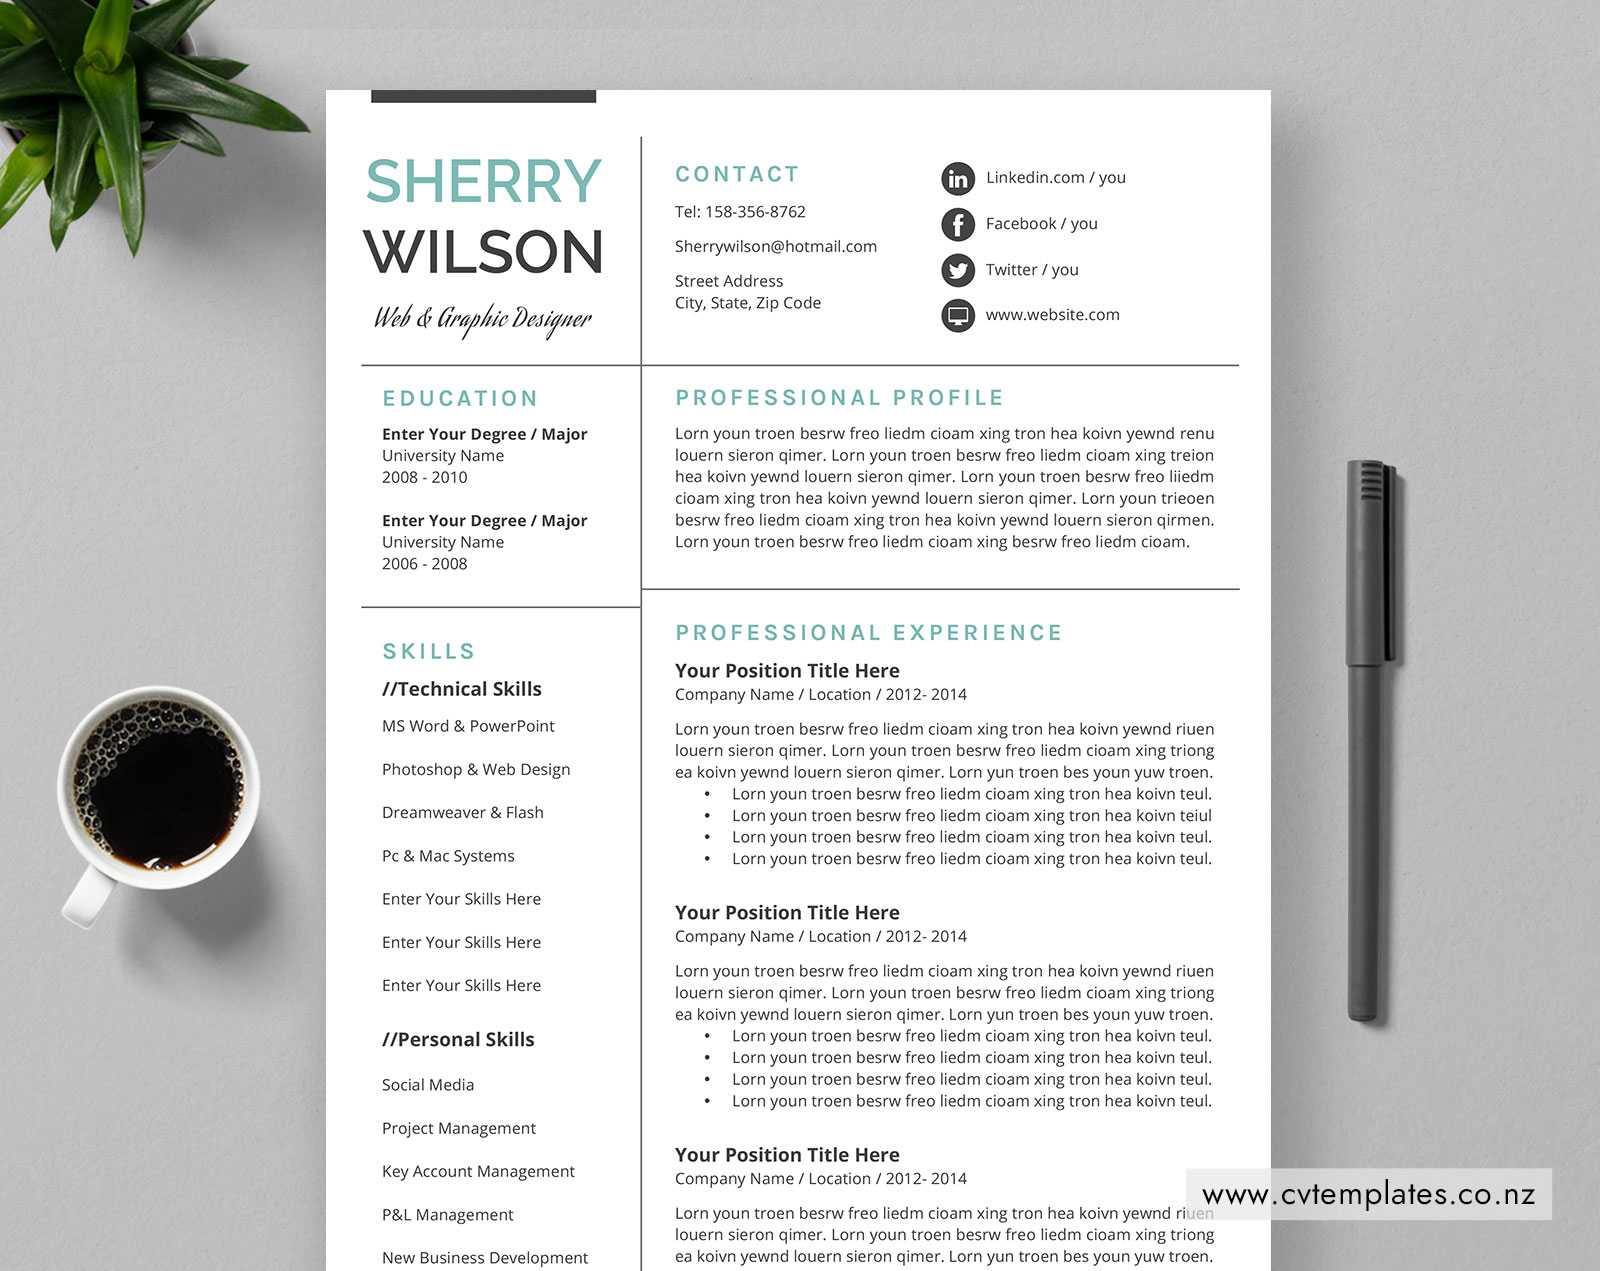 Cv Template For Ms Word, Curriculum Vitae, Editable Cv Template,  Professional & Modern Cv Template Design, Cover Letter, References, 1, 2  And 3 Page For Resume Templates Word 2010